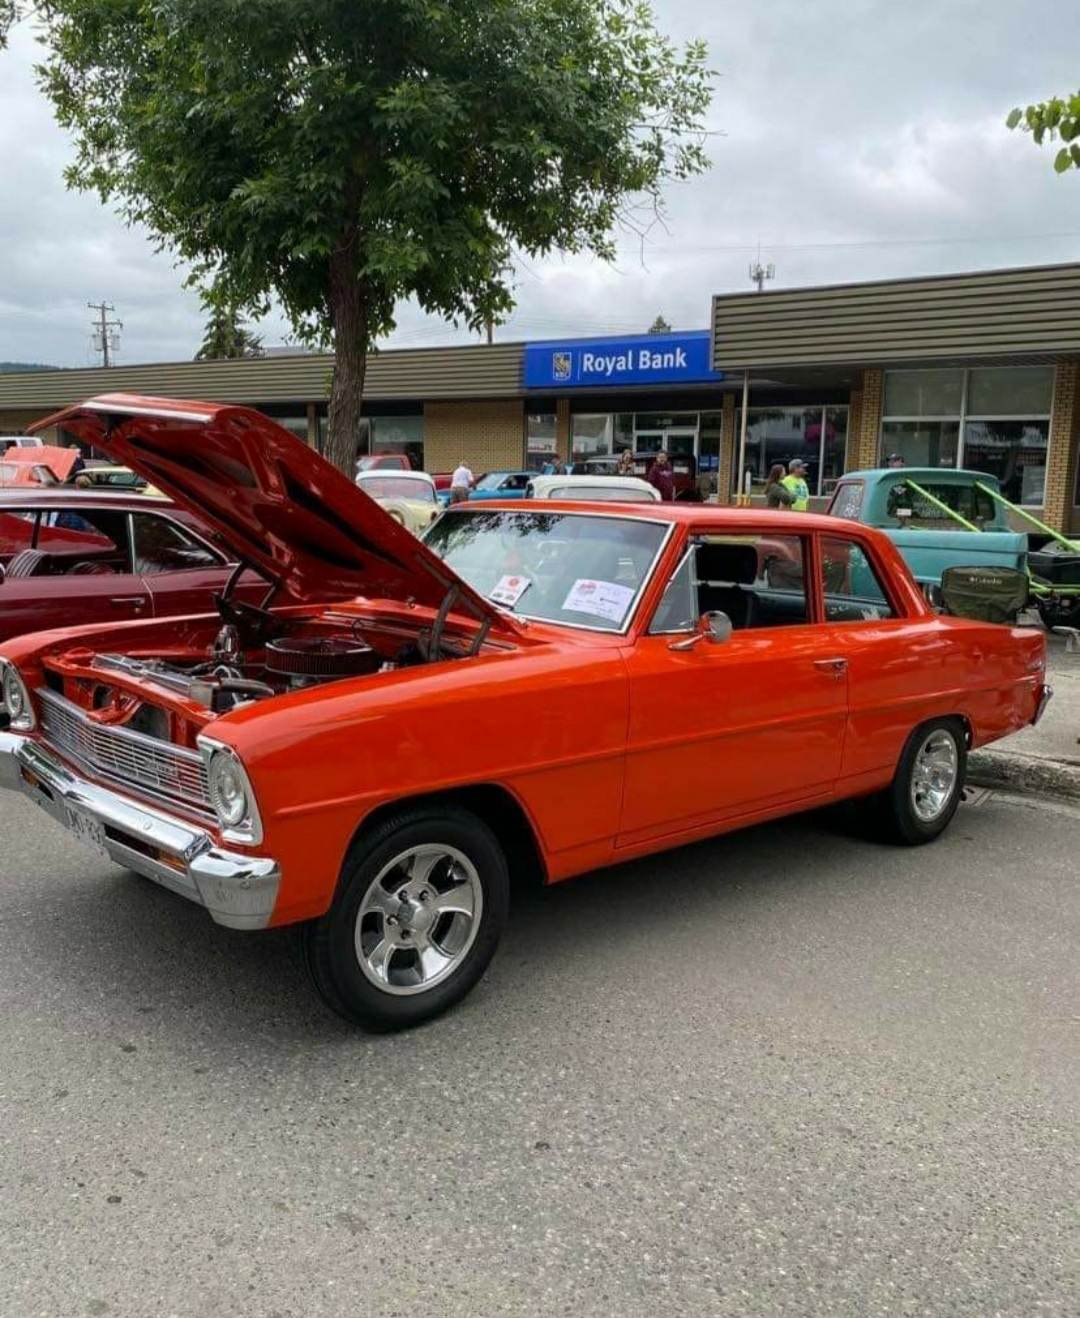 1966 Chevy II, owned by Dave & Trish Akehurst